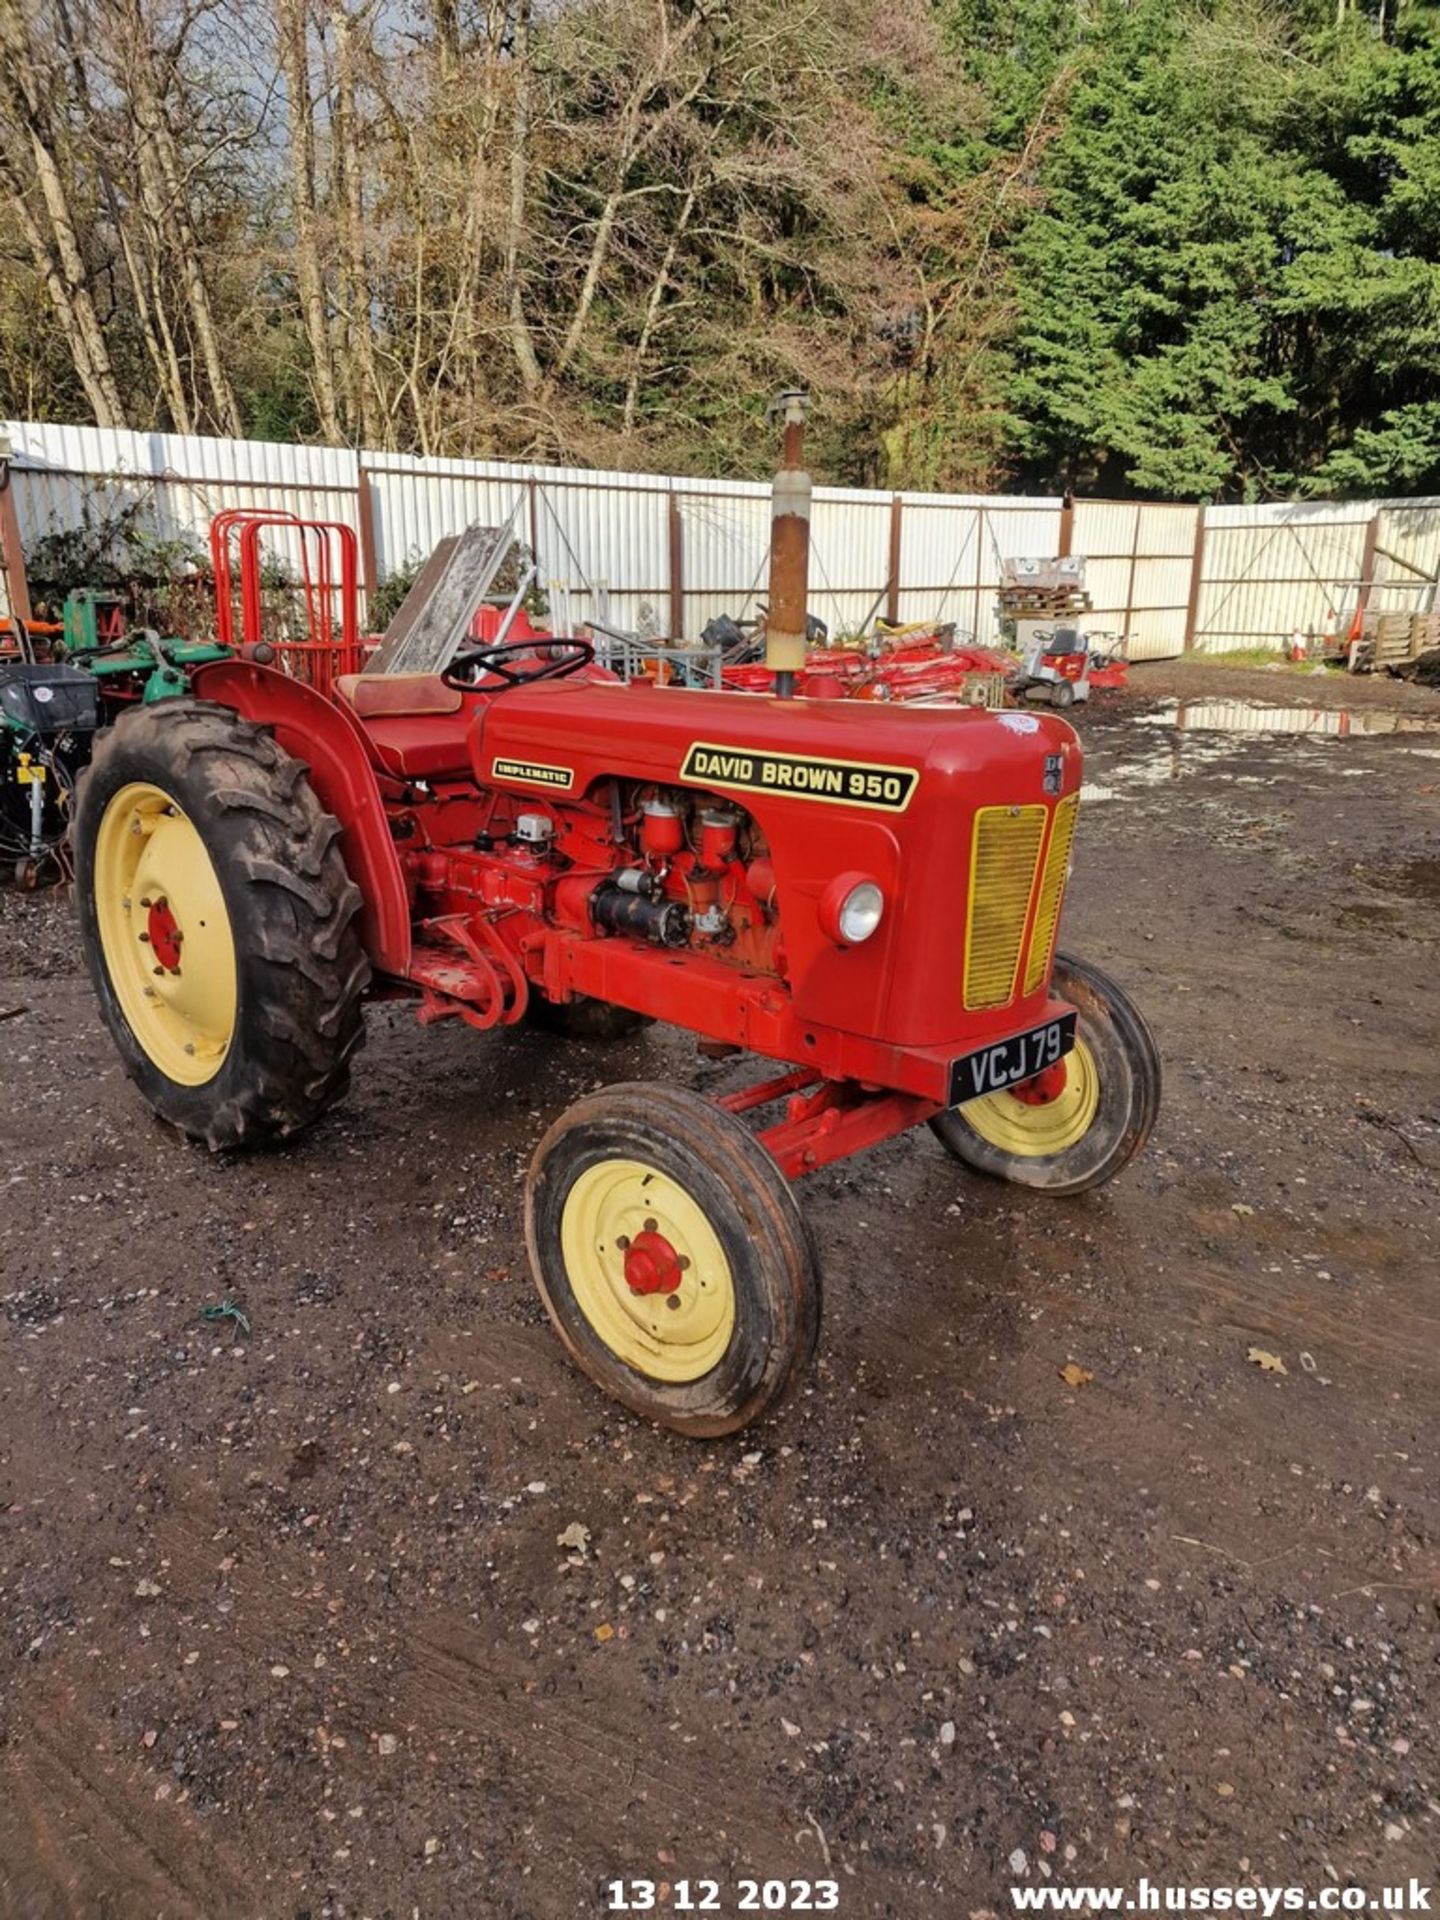 DAVID BROWN 950 IMPLEMATIC TRACTOR VCJ 79 SHOWING AS 1 OWNER ON HPI YEAR 1960 - Image 3 of 6